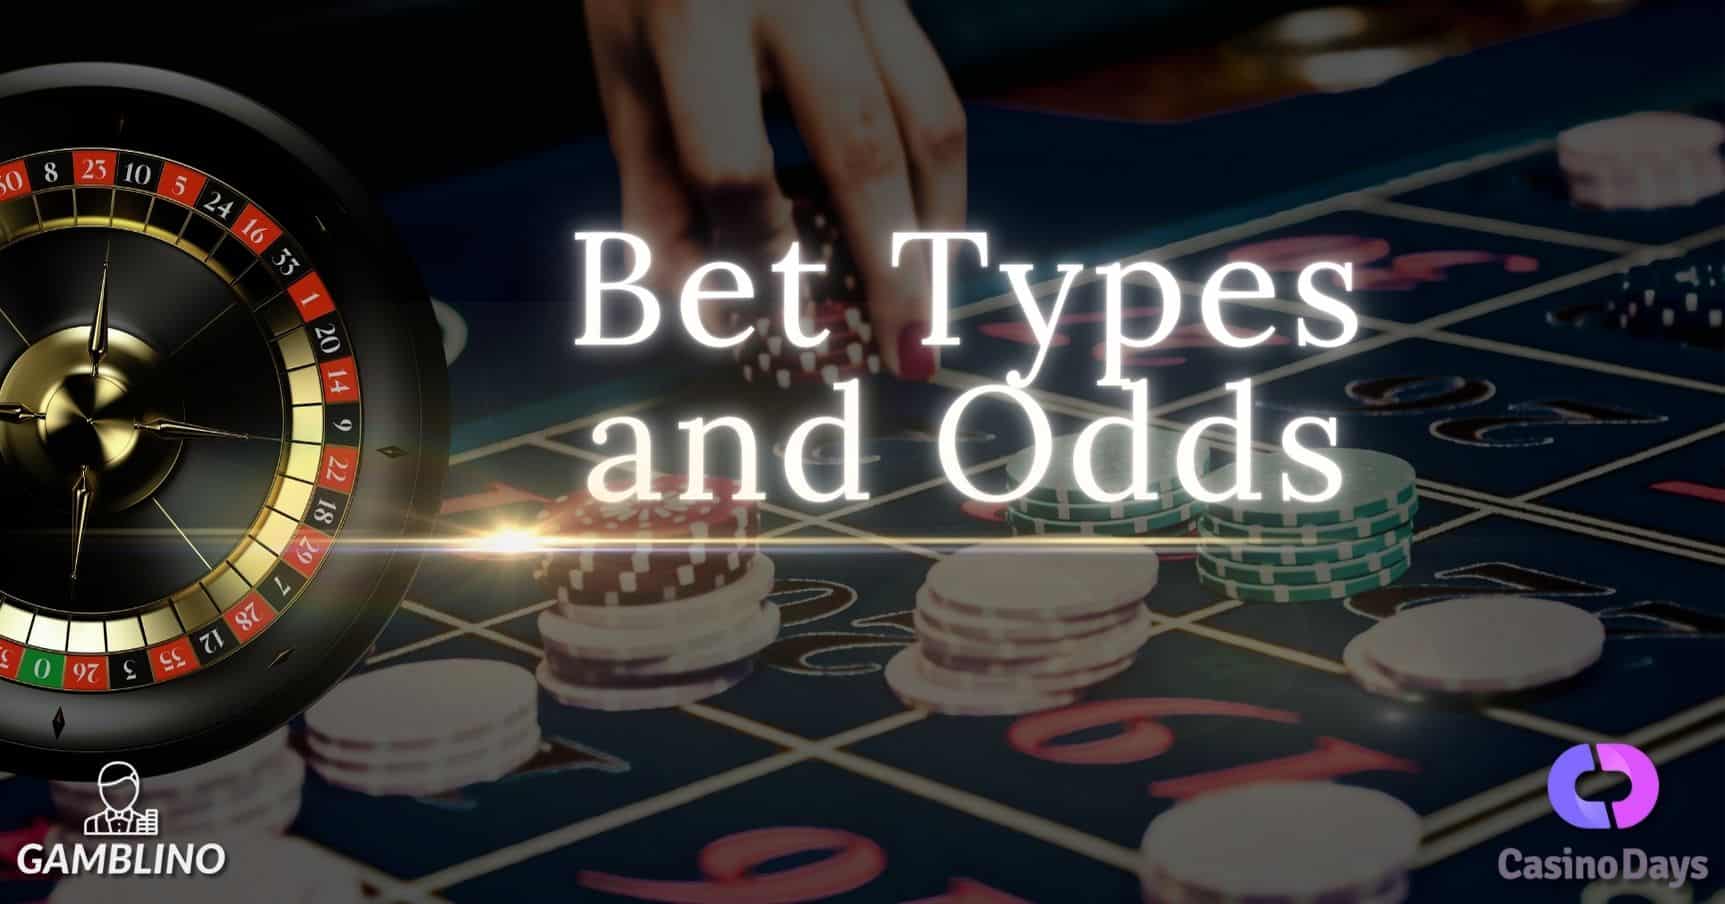 bet types and odds casino days